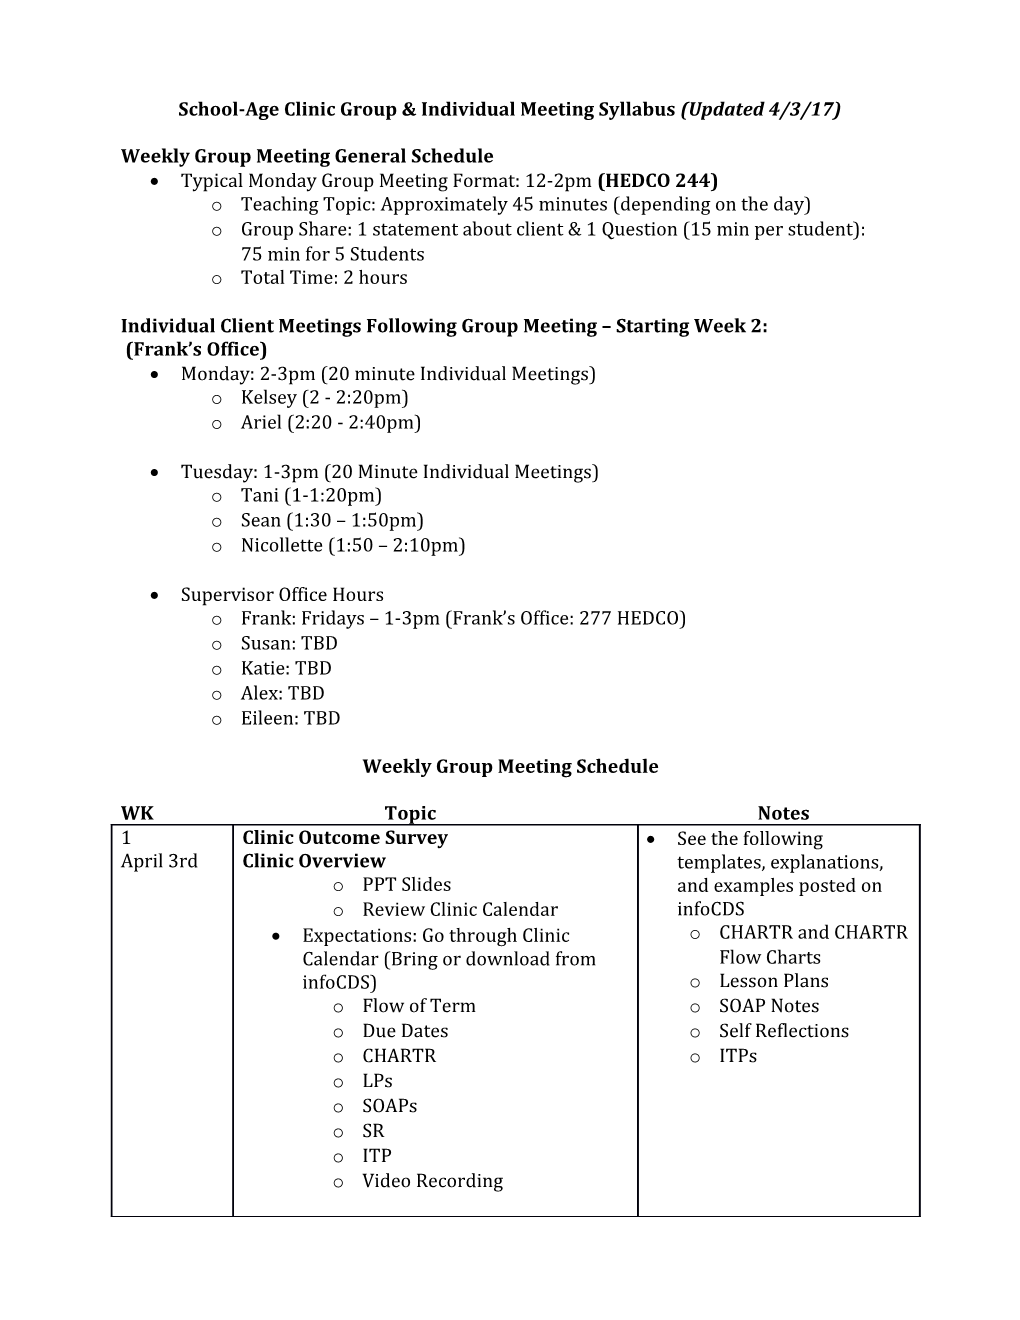 School-Age Clinic Group & Individual Meeting Syllabus(Updated 4/3/17)